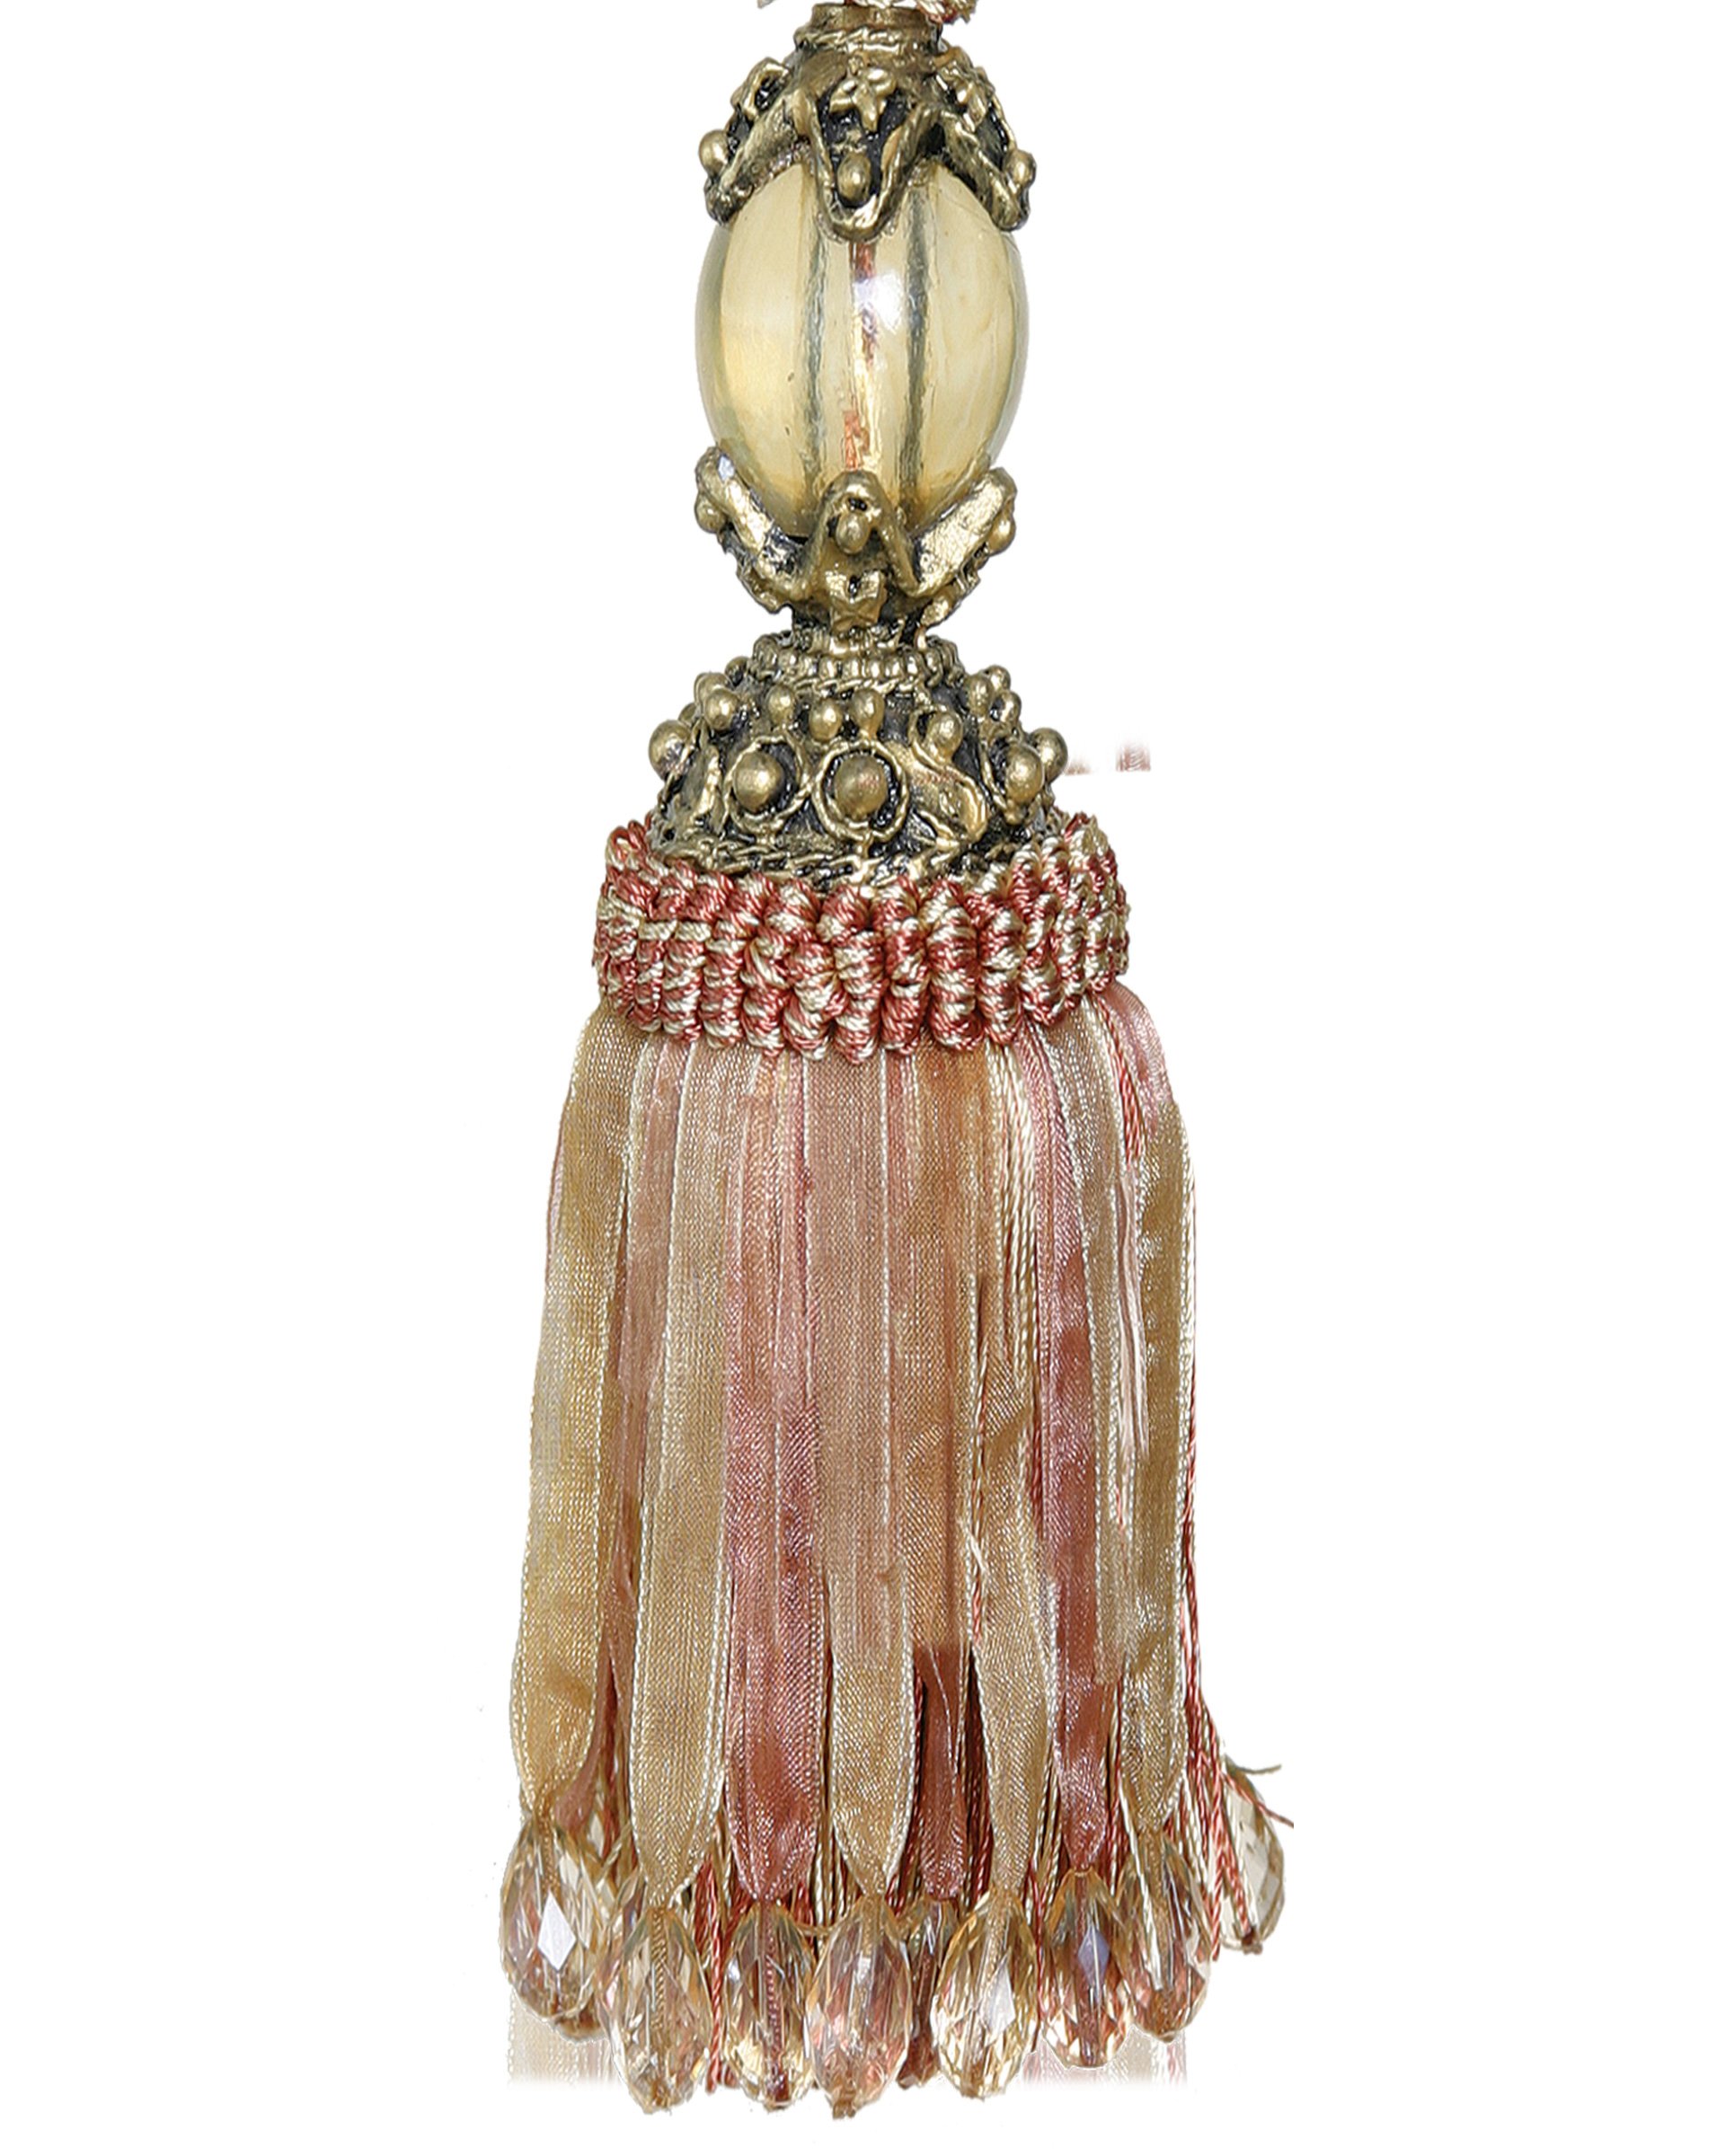 Tassel with Round Bead Fancy Top - Amber / Gold 15cm